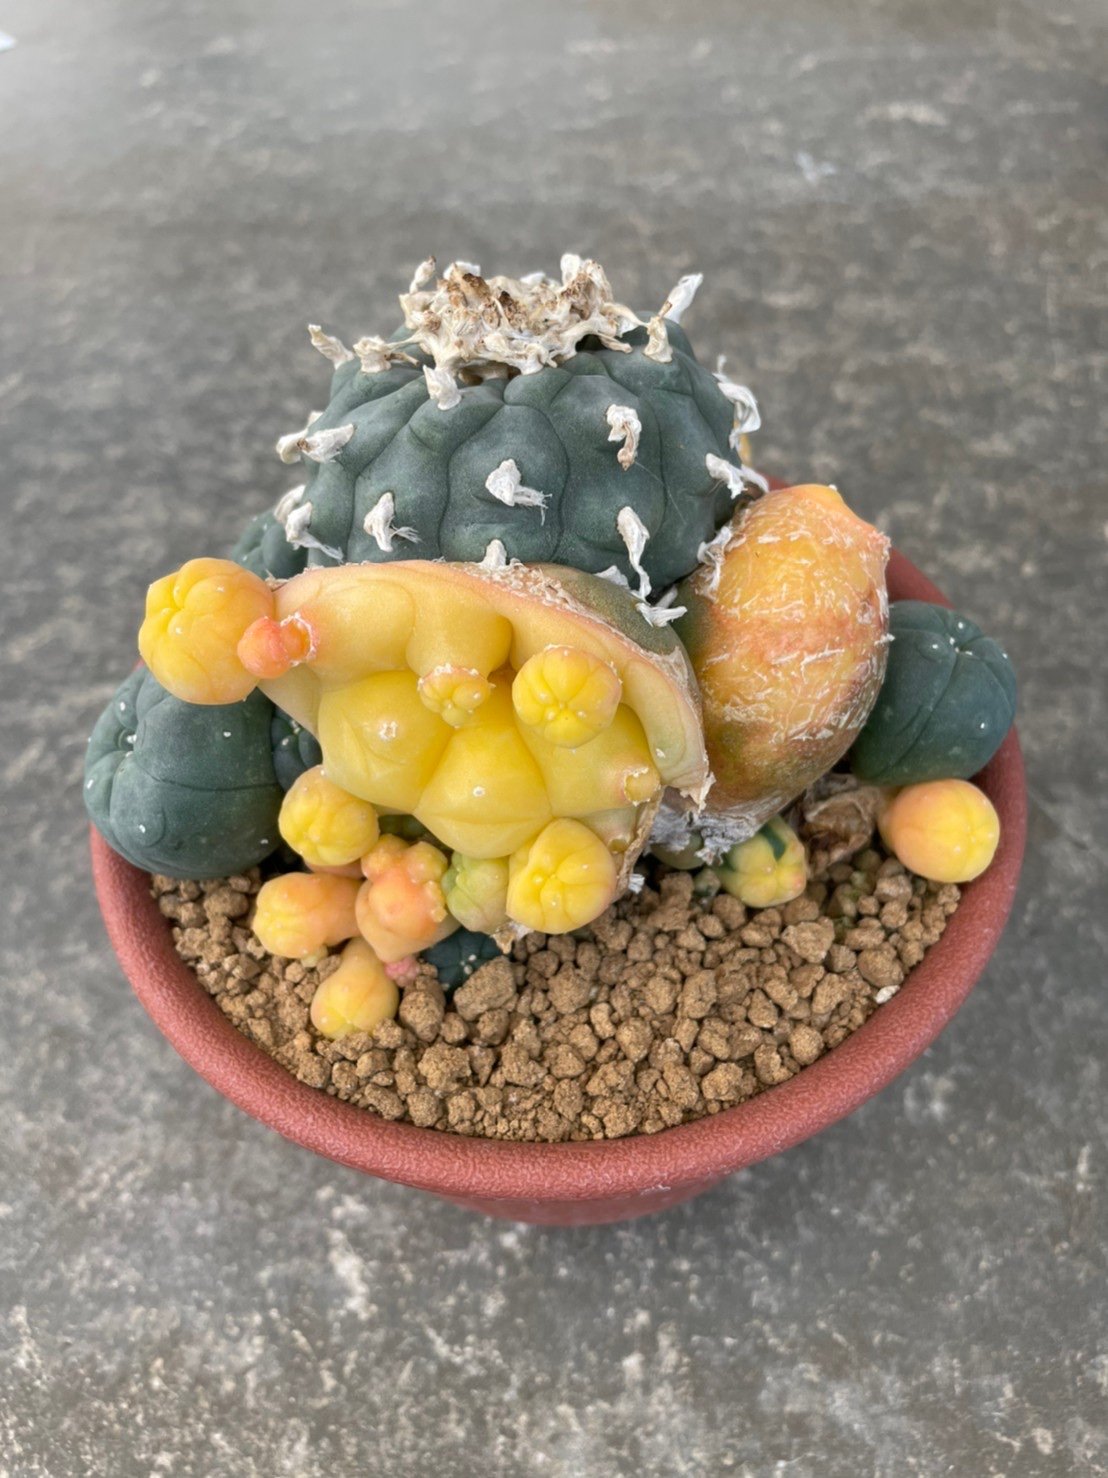 Lophophora williamsii variegata  grow from seed 25 years old - can give flower and seed ownroot